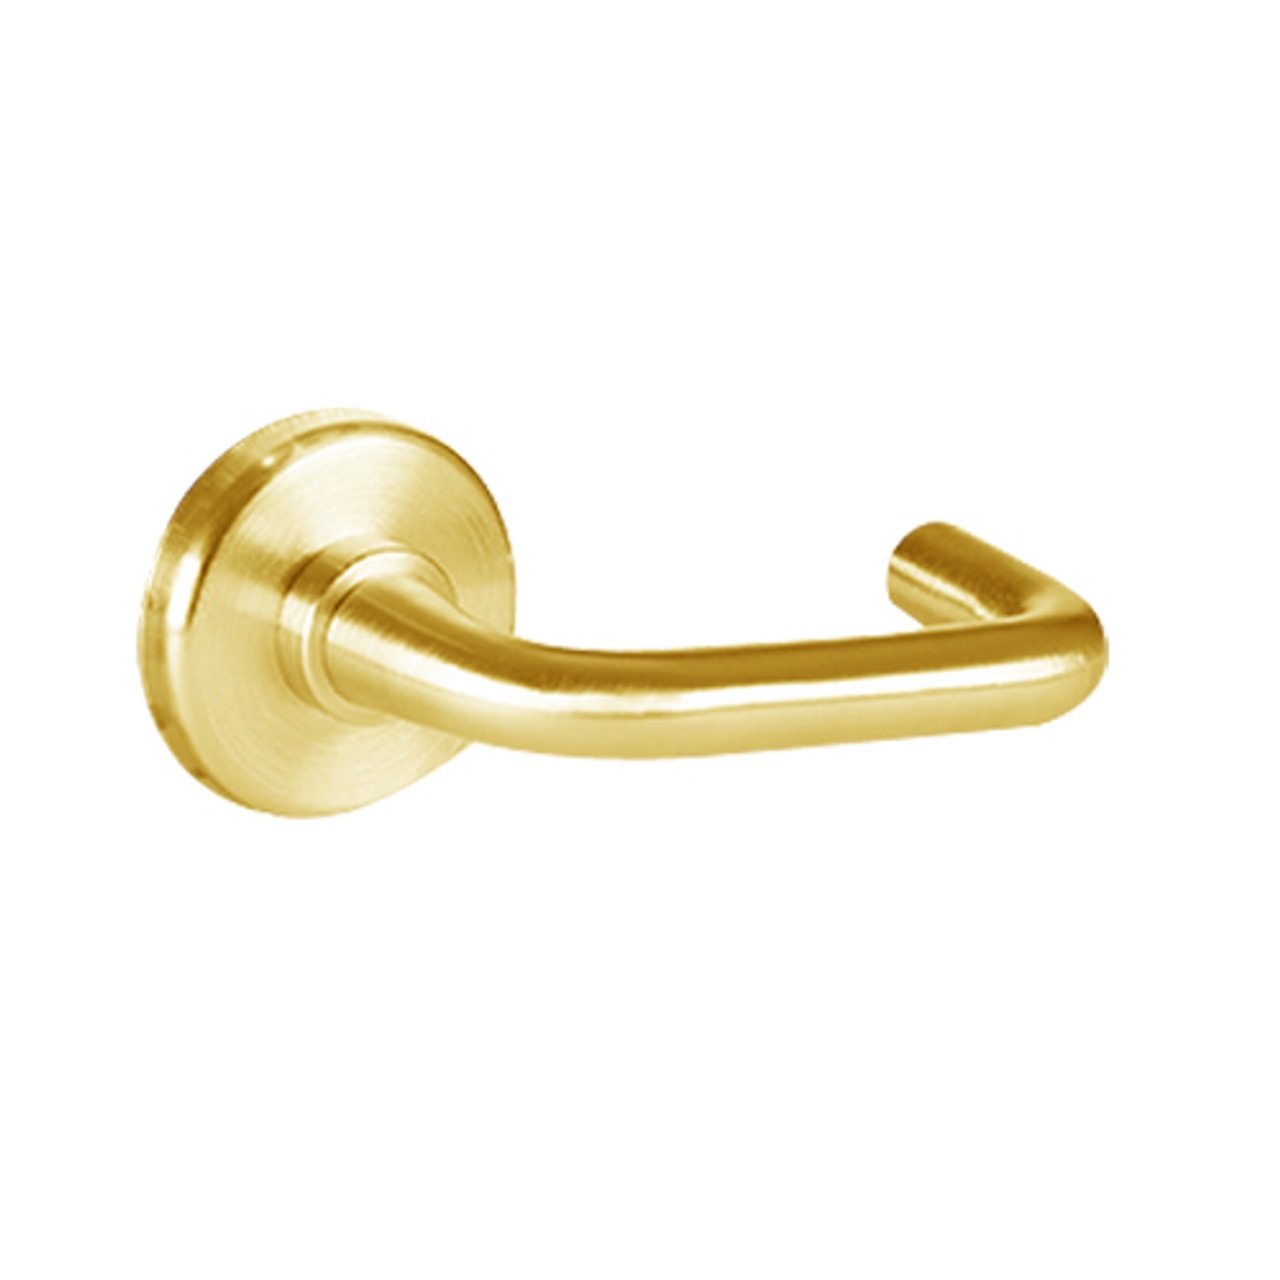 40HTKOS13H605 Best 40H Series Trim Kits Outside Lever Only with Solid Tube-Return Trim Style in Bright Brass